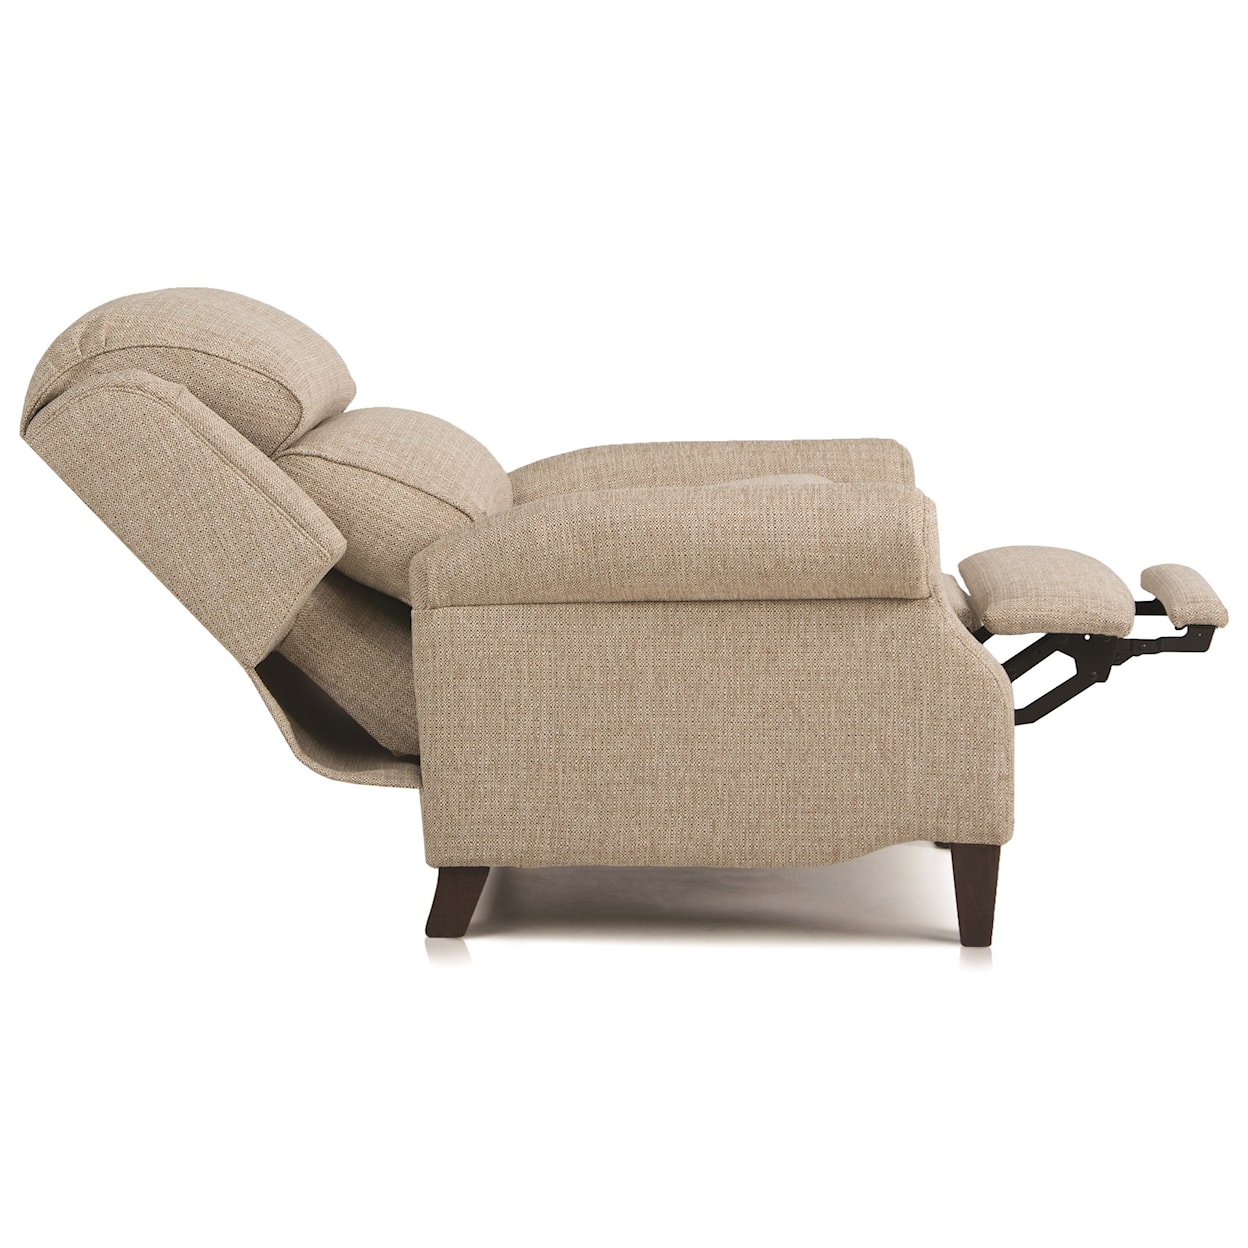 Smith Brothers 503 Traditional Motorized Reclining Chair